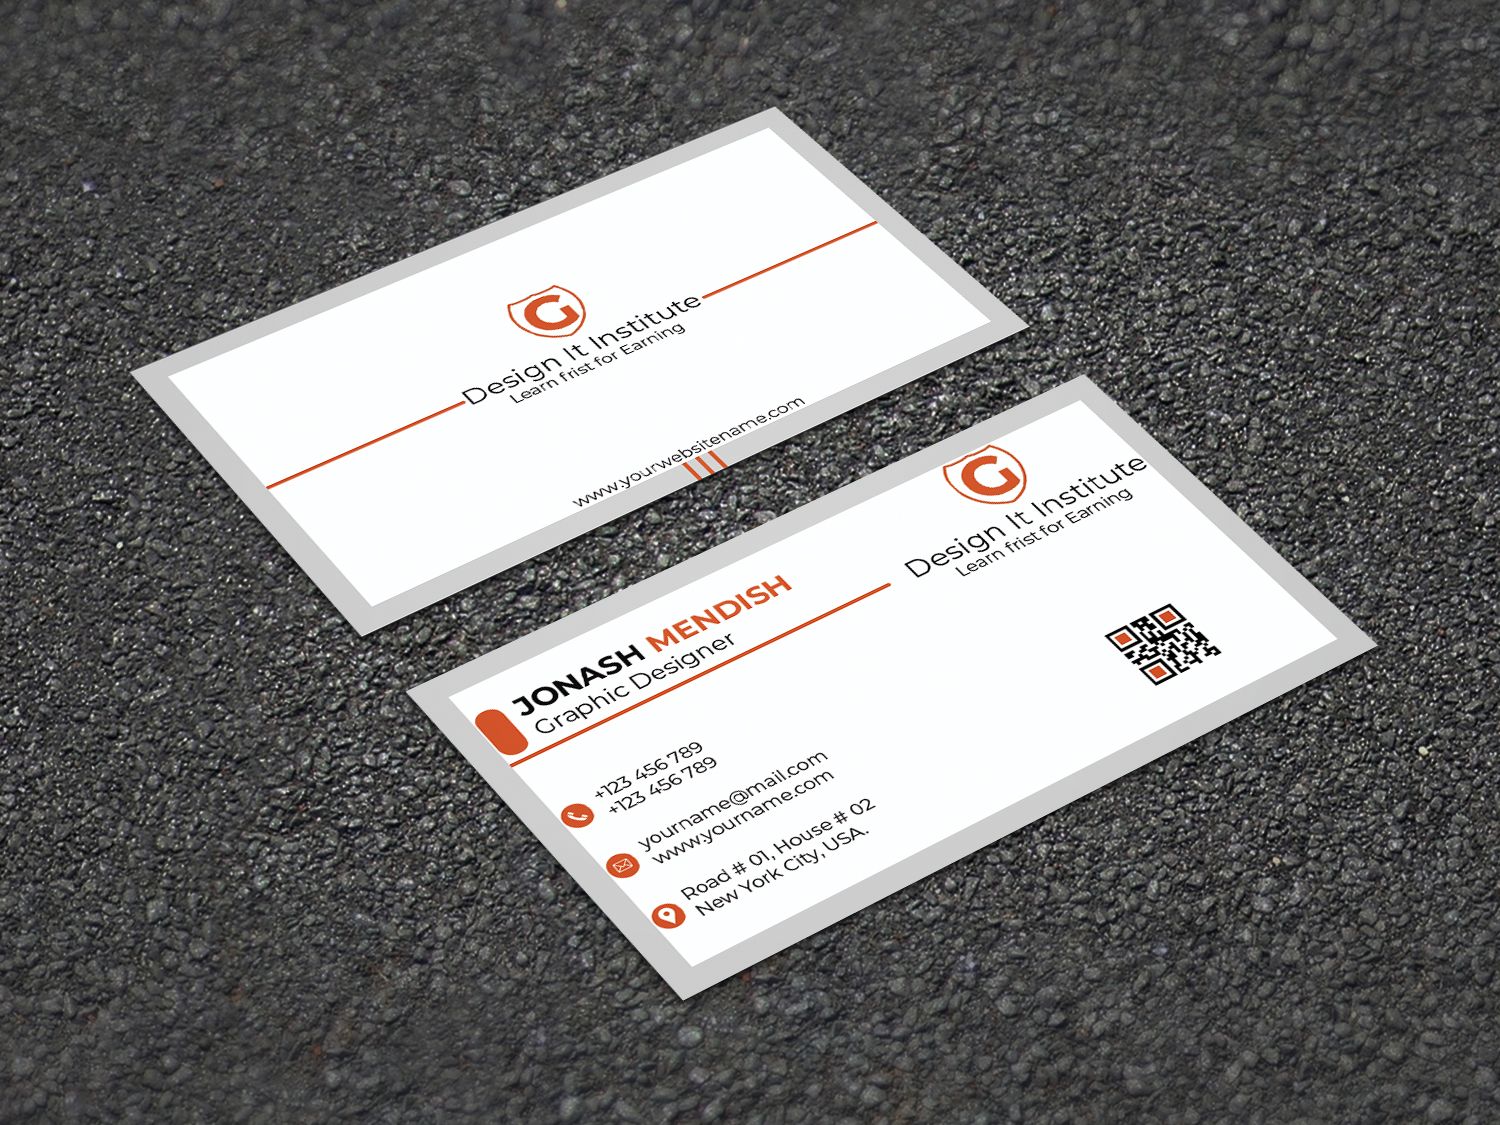 Why Choose New York City Business Cards?